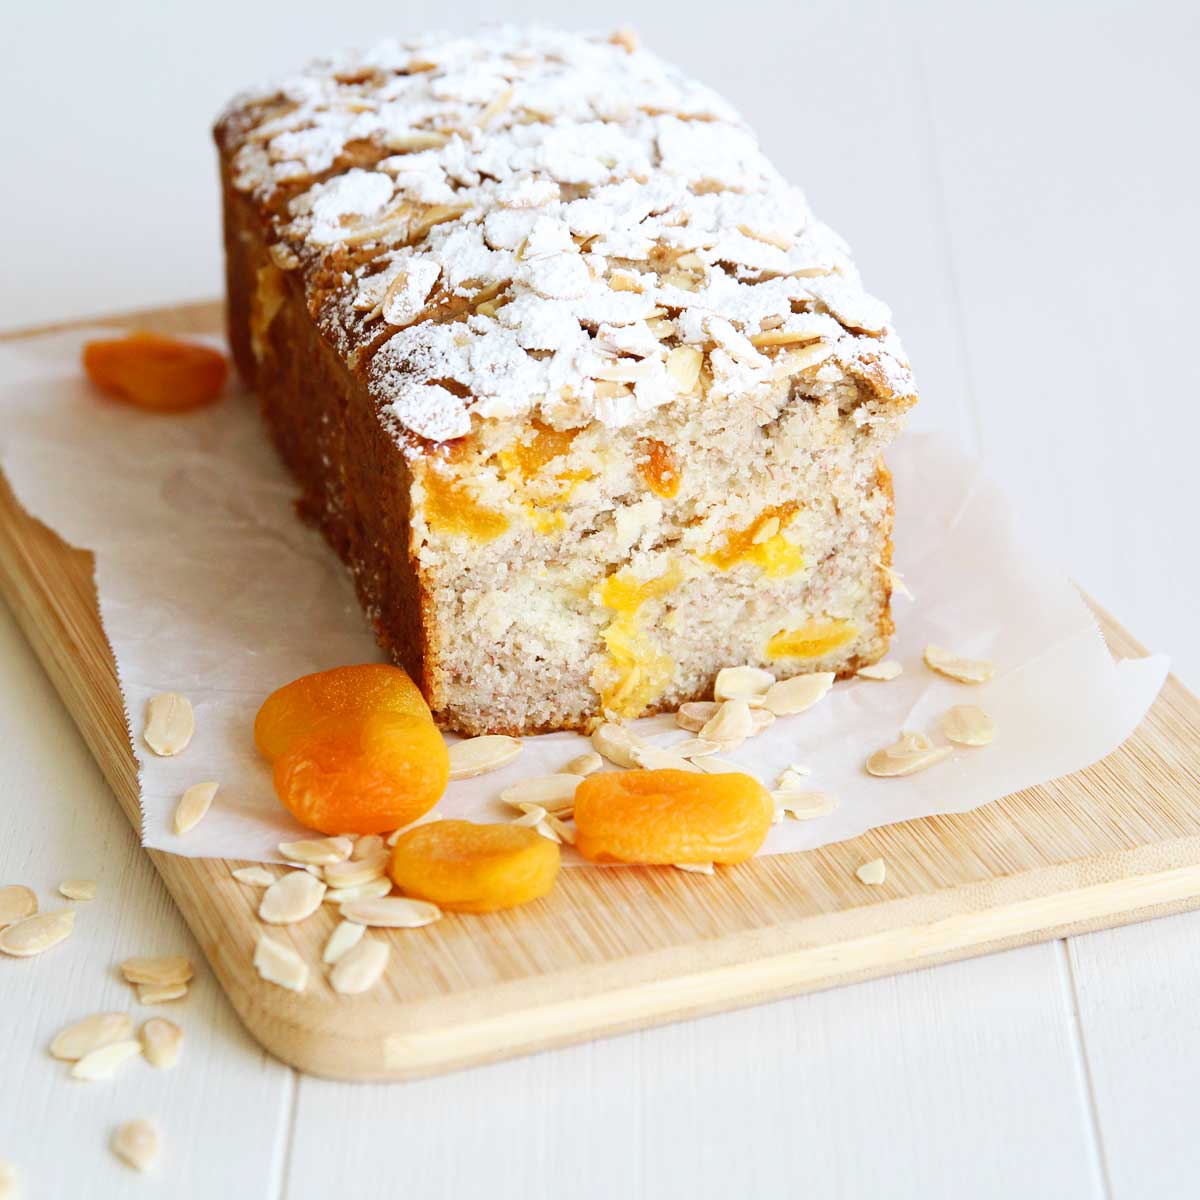 Simply Divine: Moist Vegan Almond Banana Bread with Apricots (Eggless, Dairy Free!) - Vegan Chocolate Whipped Cream